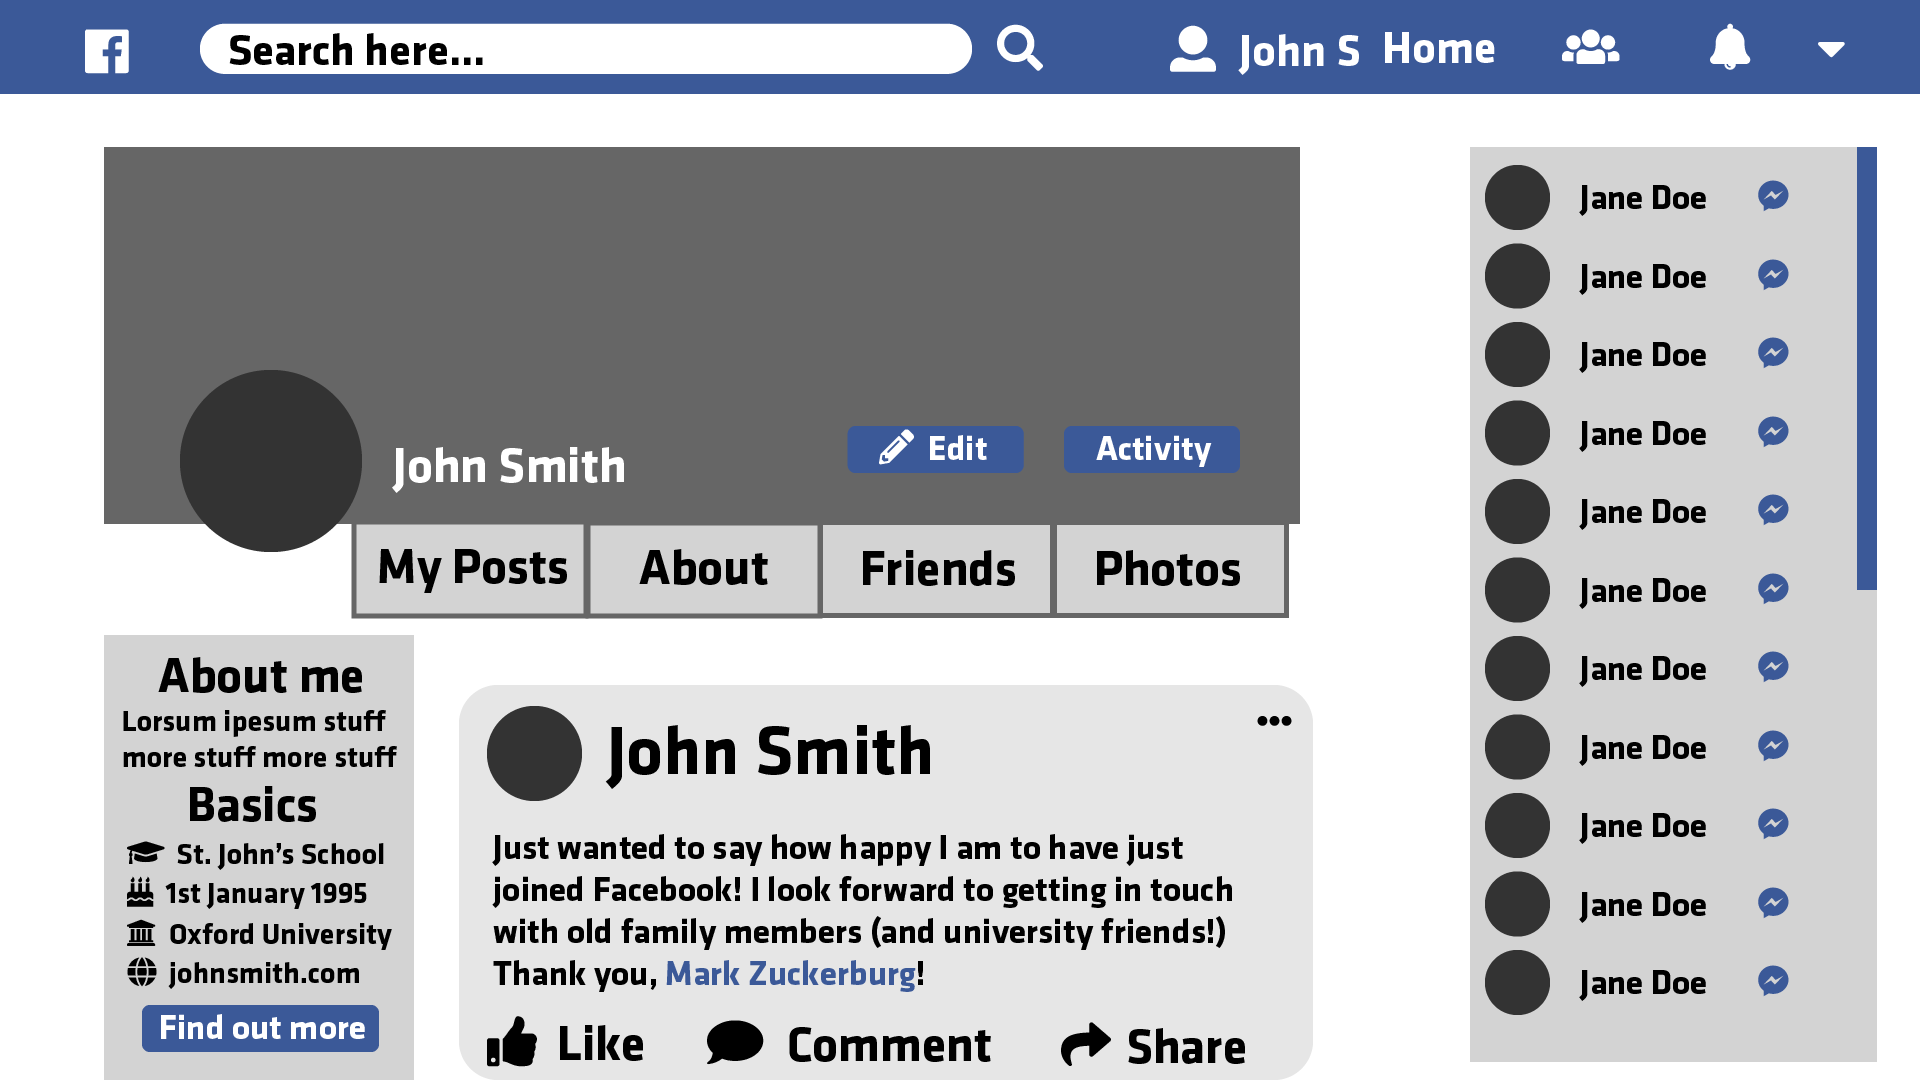 The Facebook profile page